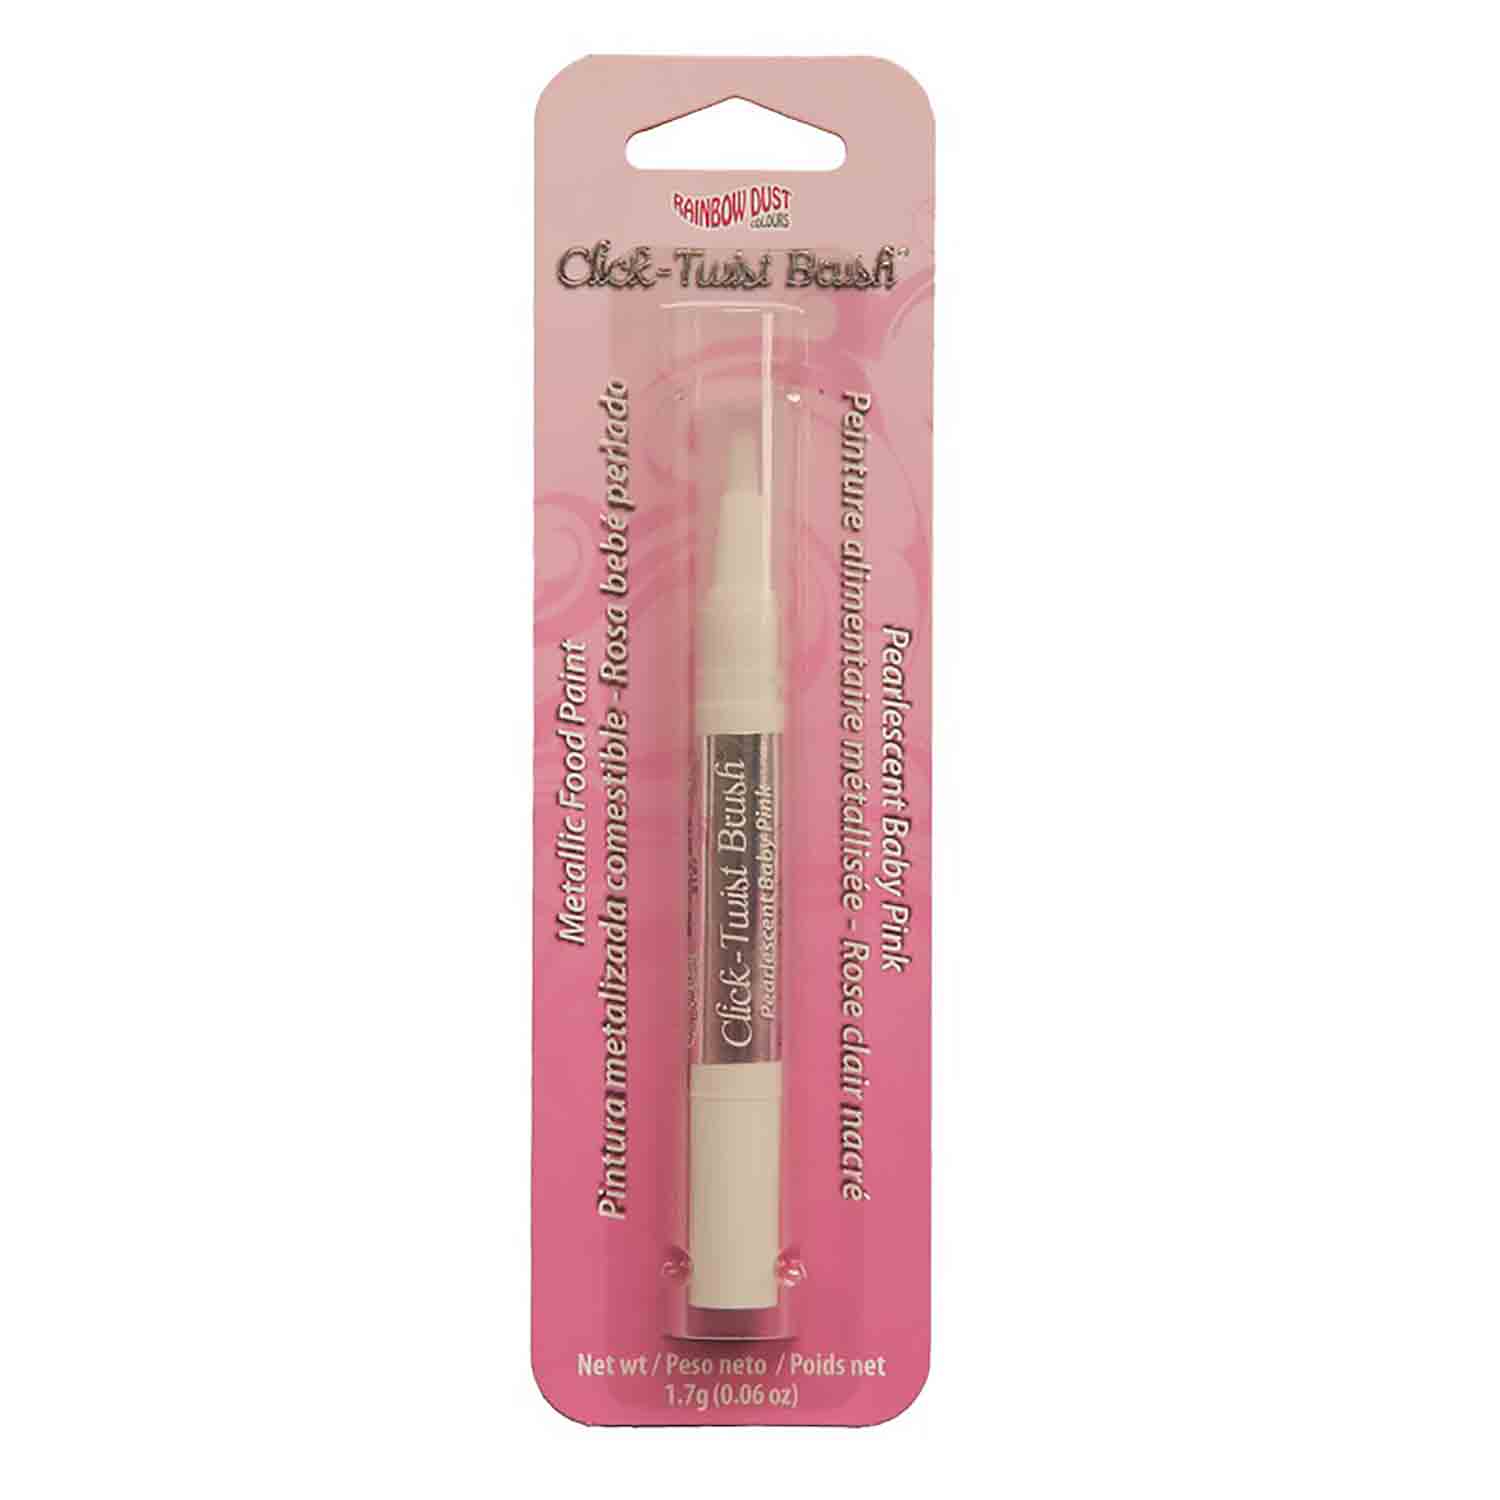 Pearlescent Baby Pink Click-Twist Brush